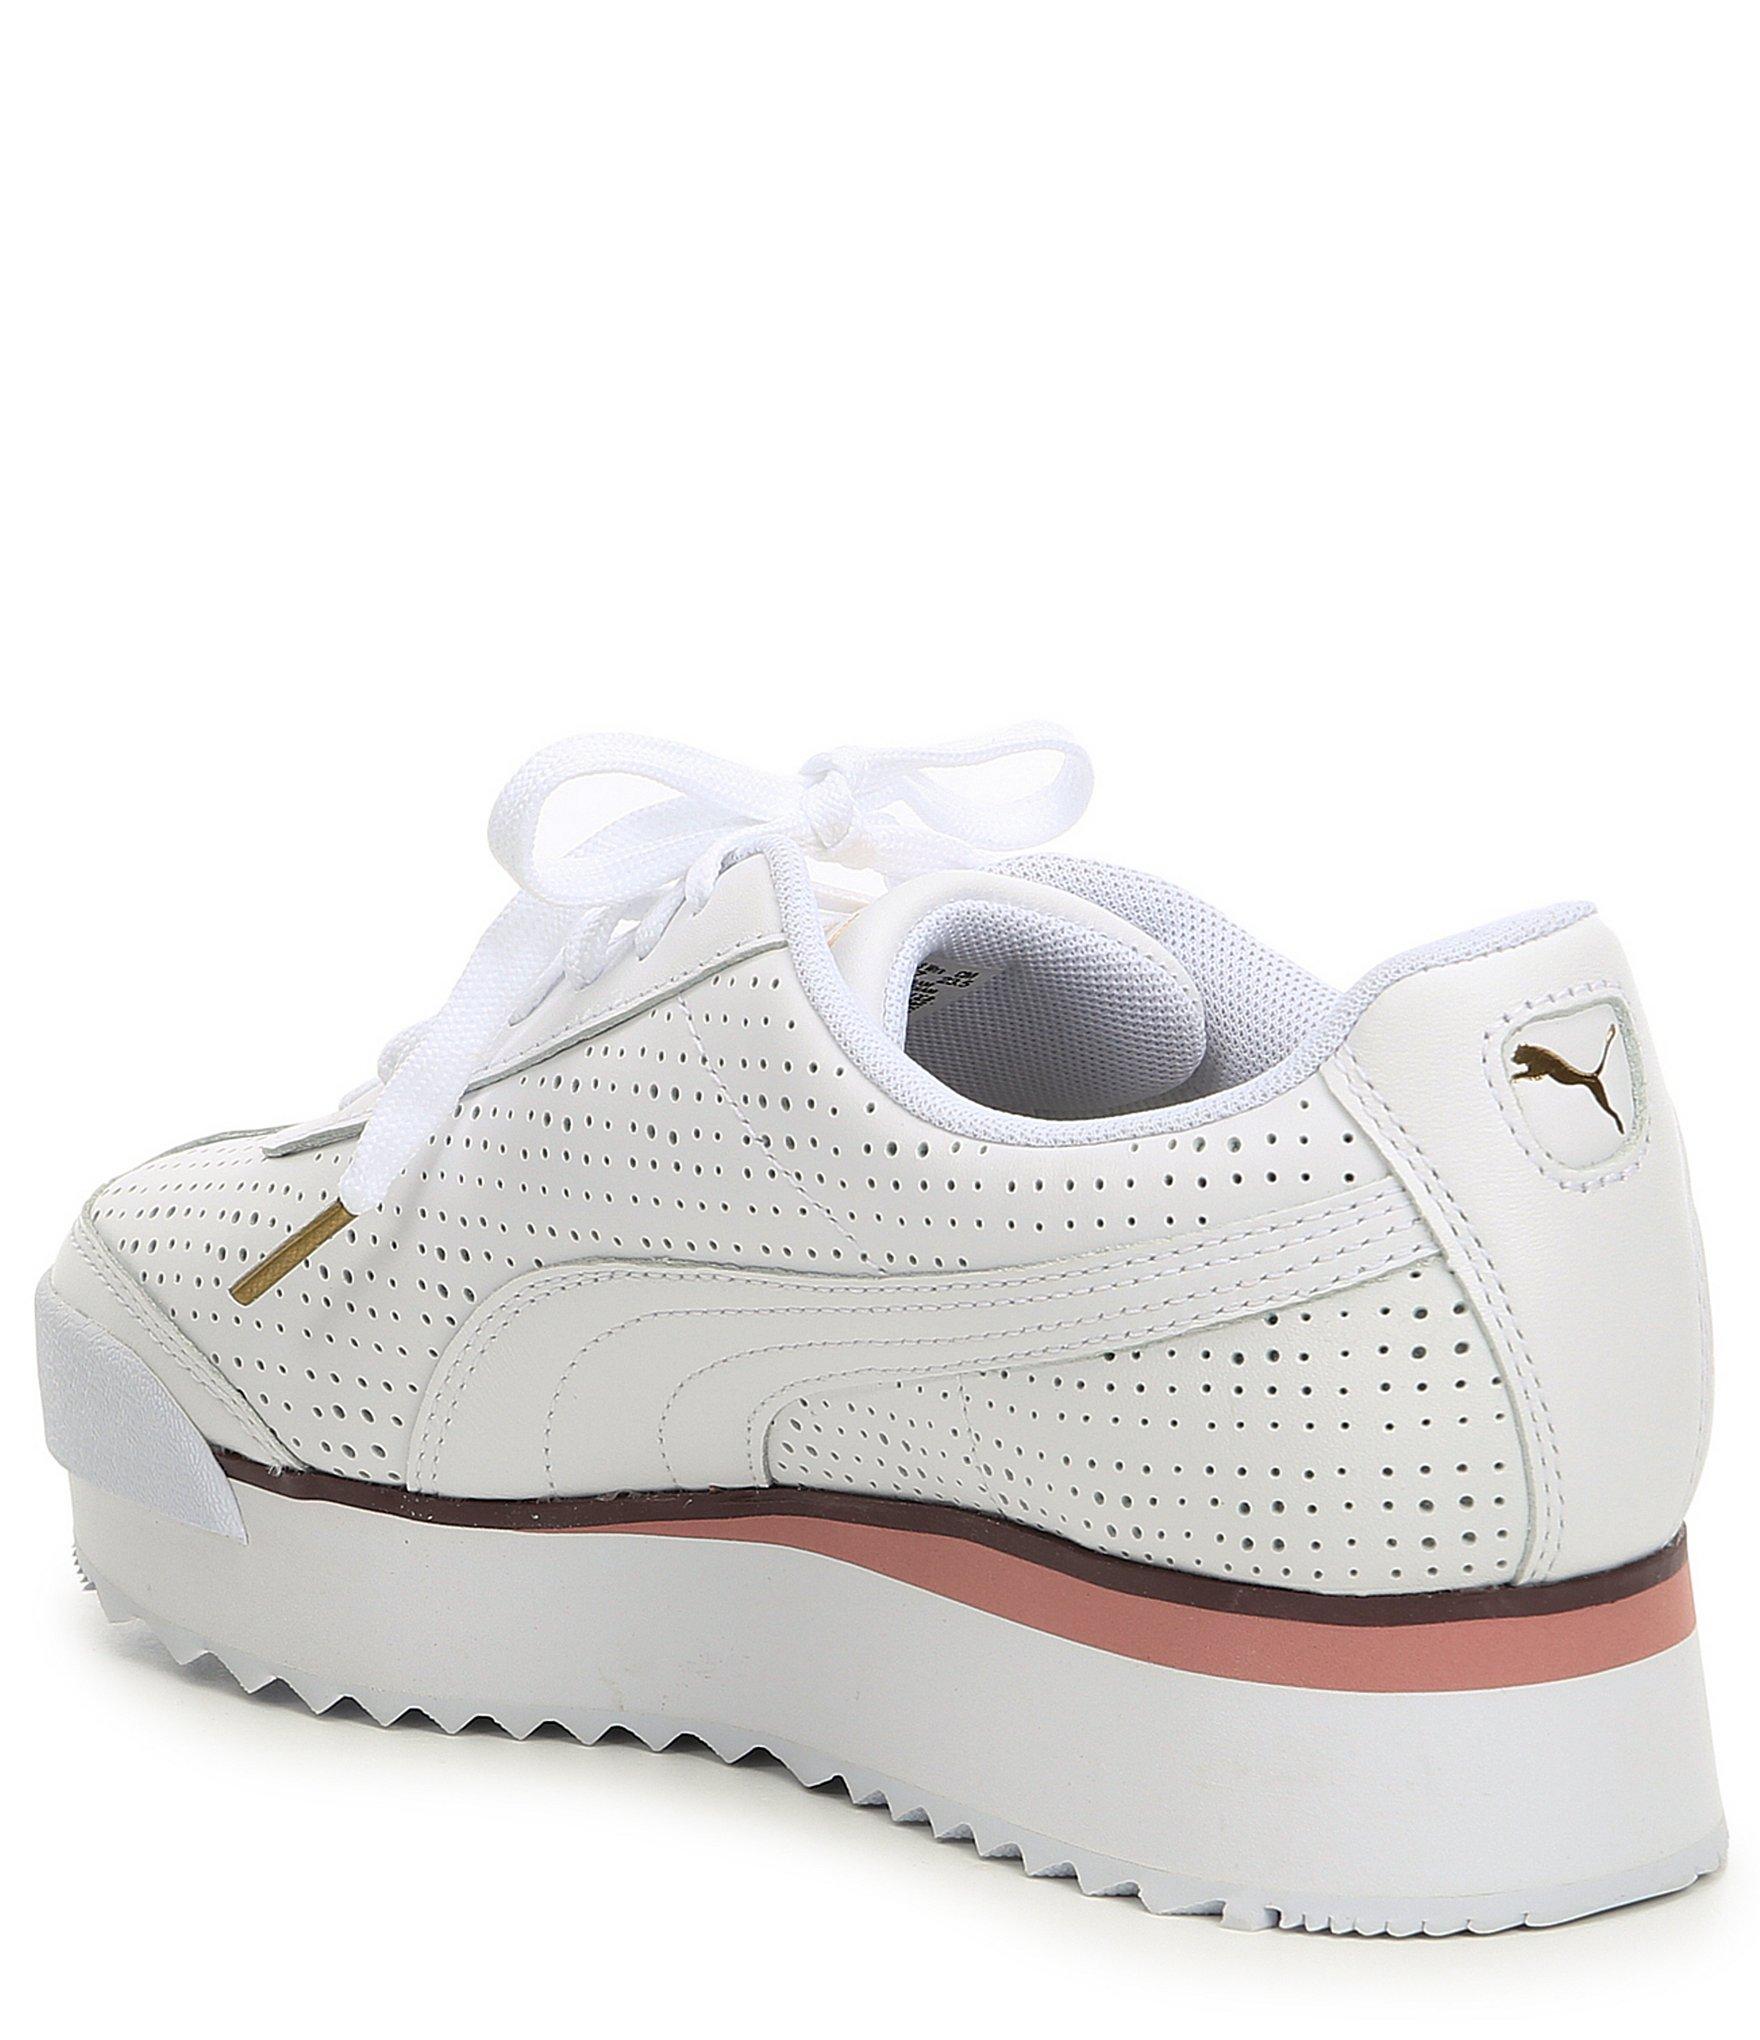 PUMA Women's Roma Amor Perforated Leather Platform Sneakers in White ...